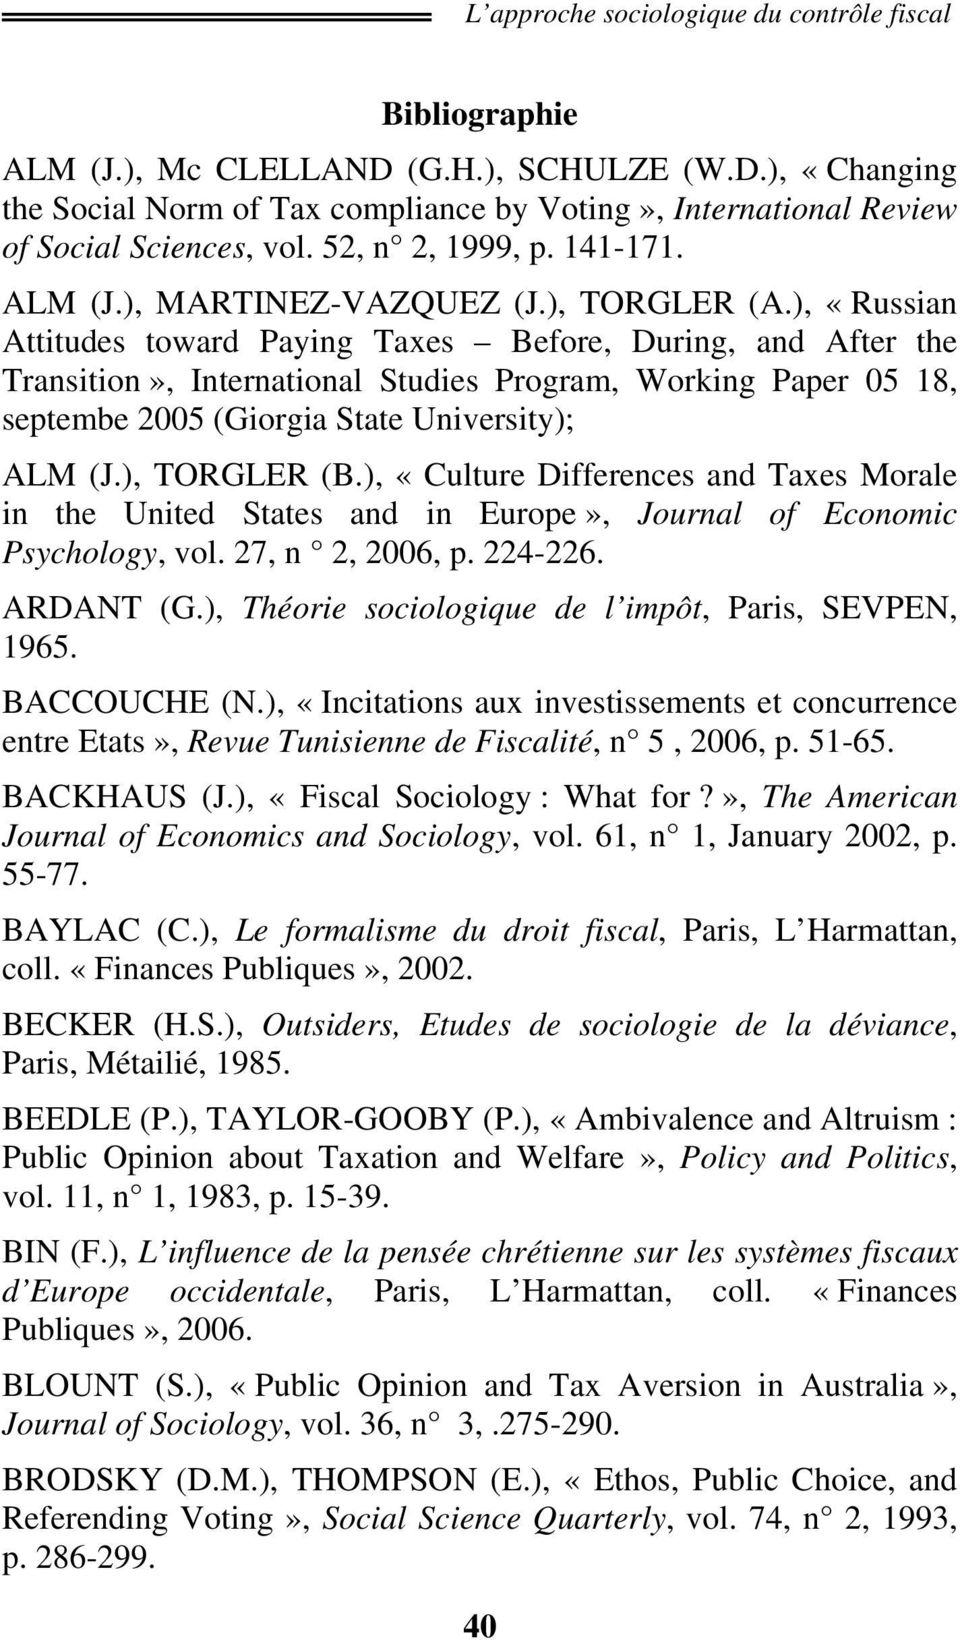 ), TORGLER (B.), «Culture Differences and Taxes Morale in the United States and in Europe», Journal of Economic Psychology, vol. 27, n 2, 2006, p. 224-226. ARDANT (G.